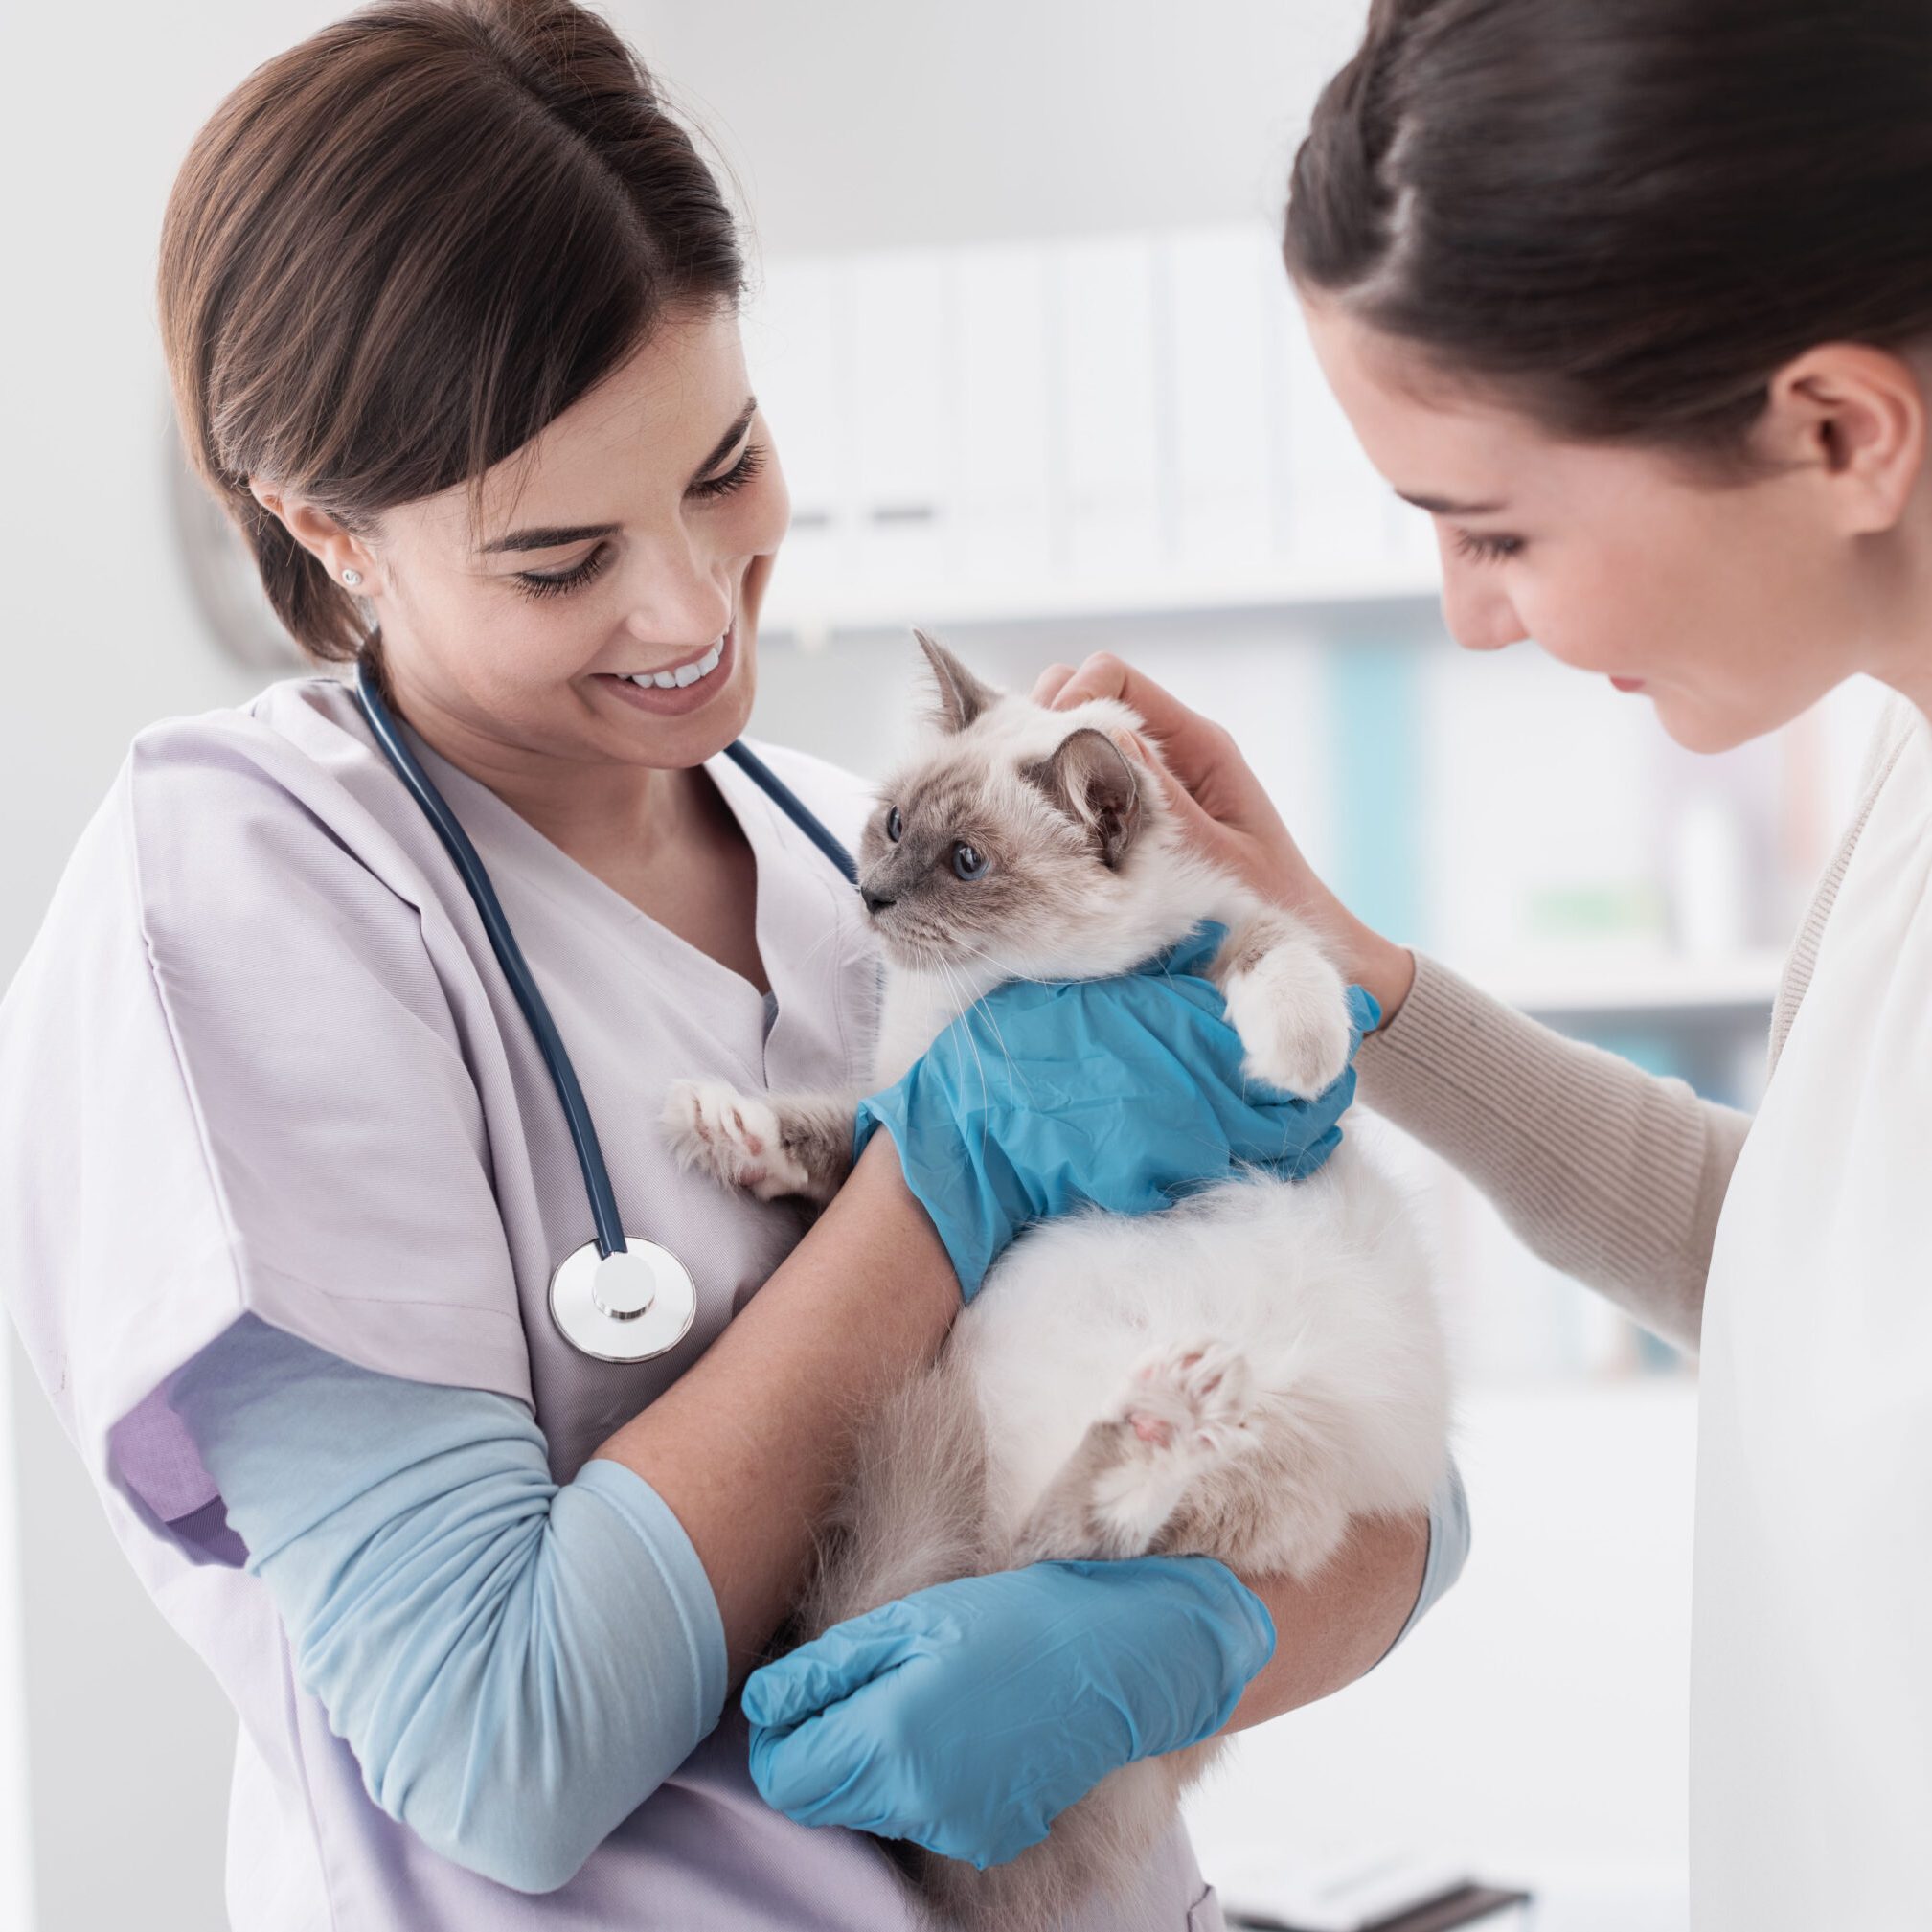 Woman veterinarian holding siamese cat with another woman